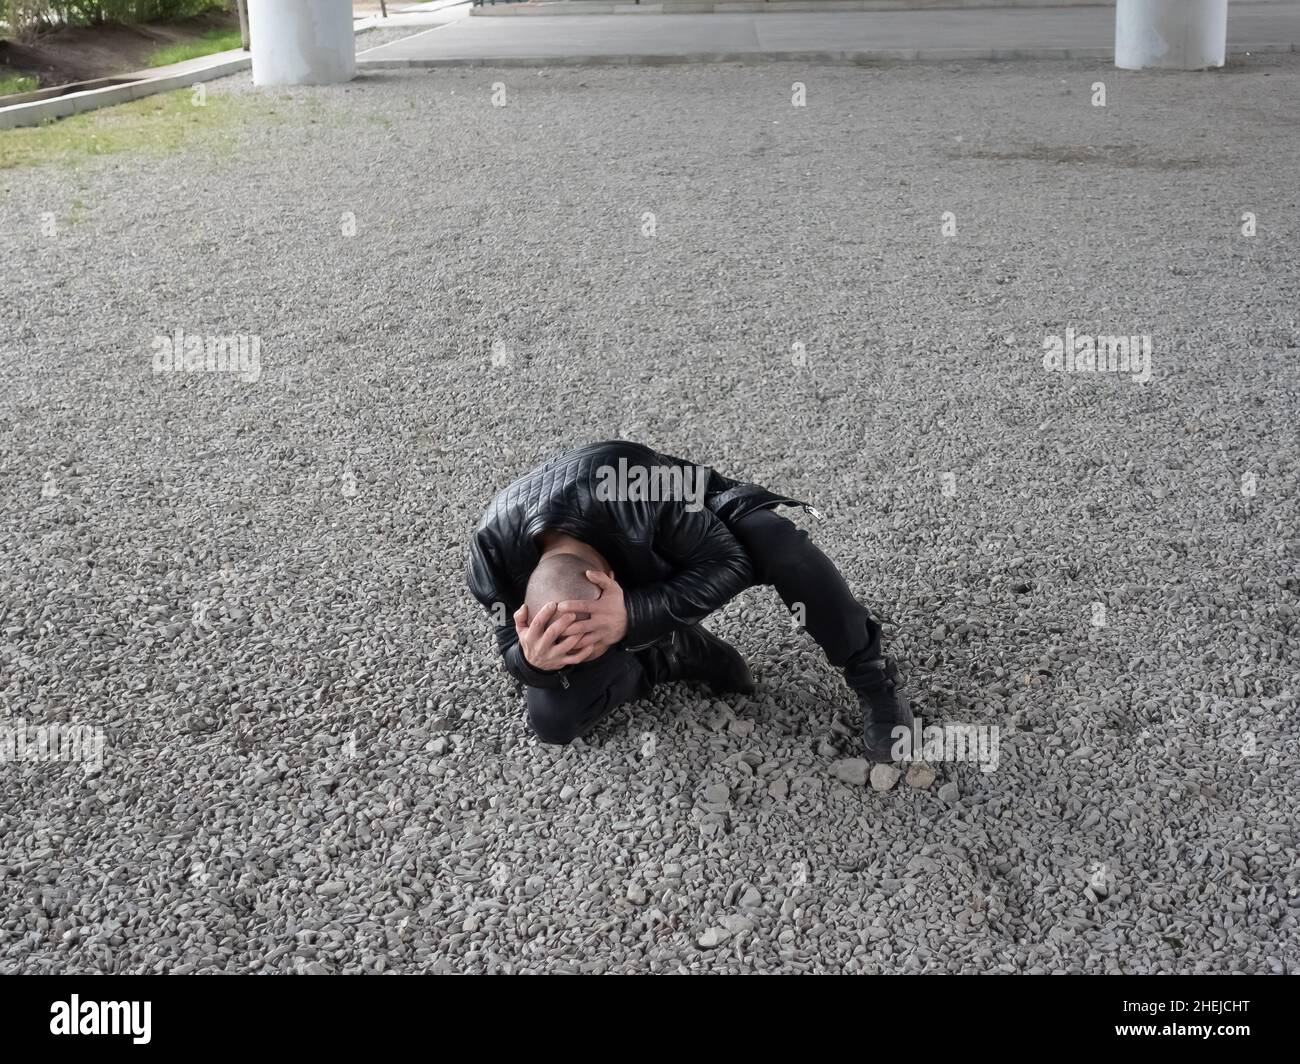 Bald man fell and holds his head after attack.  Stock Photo